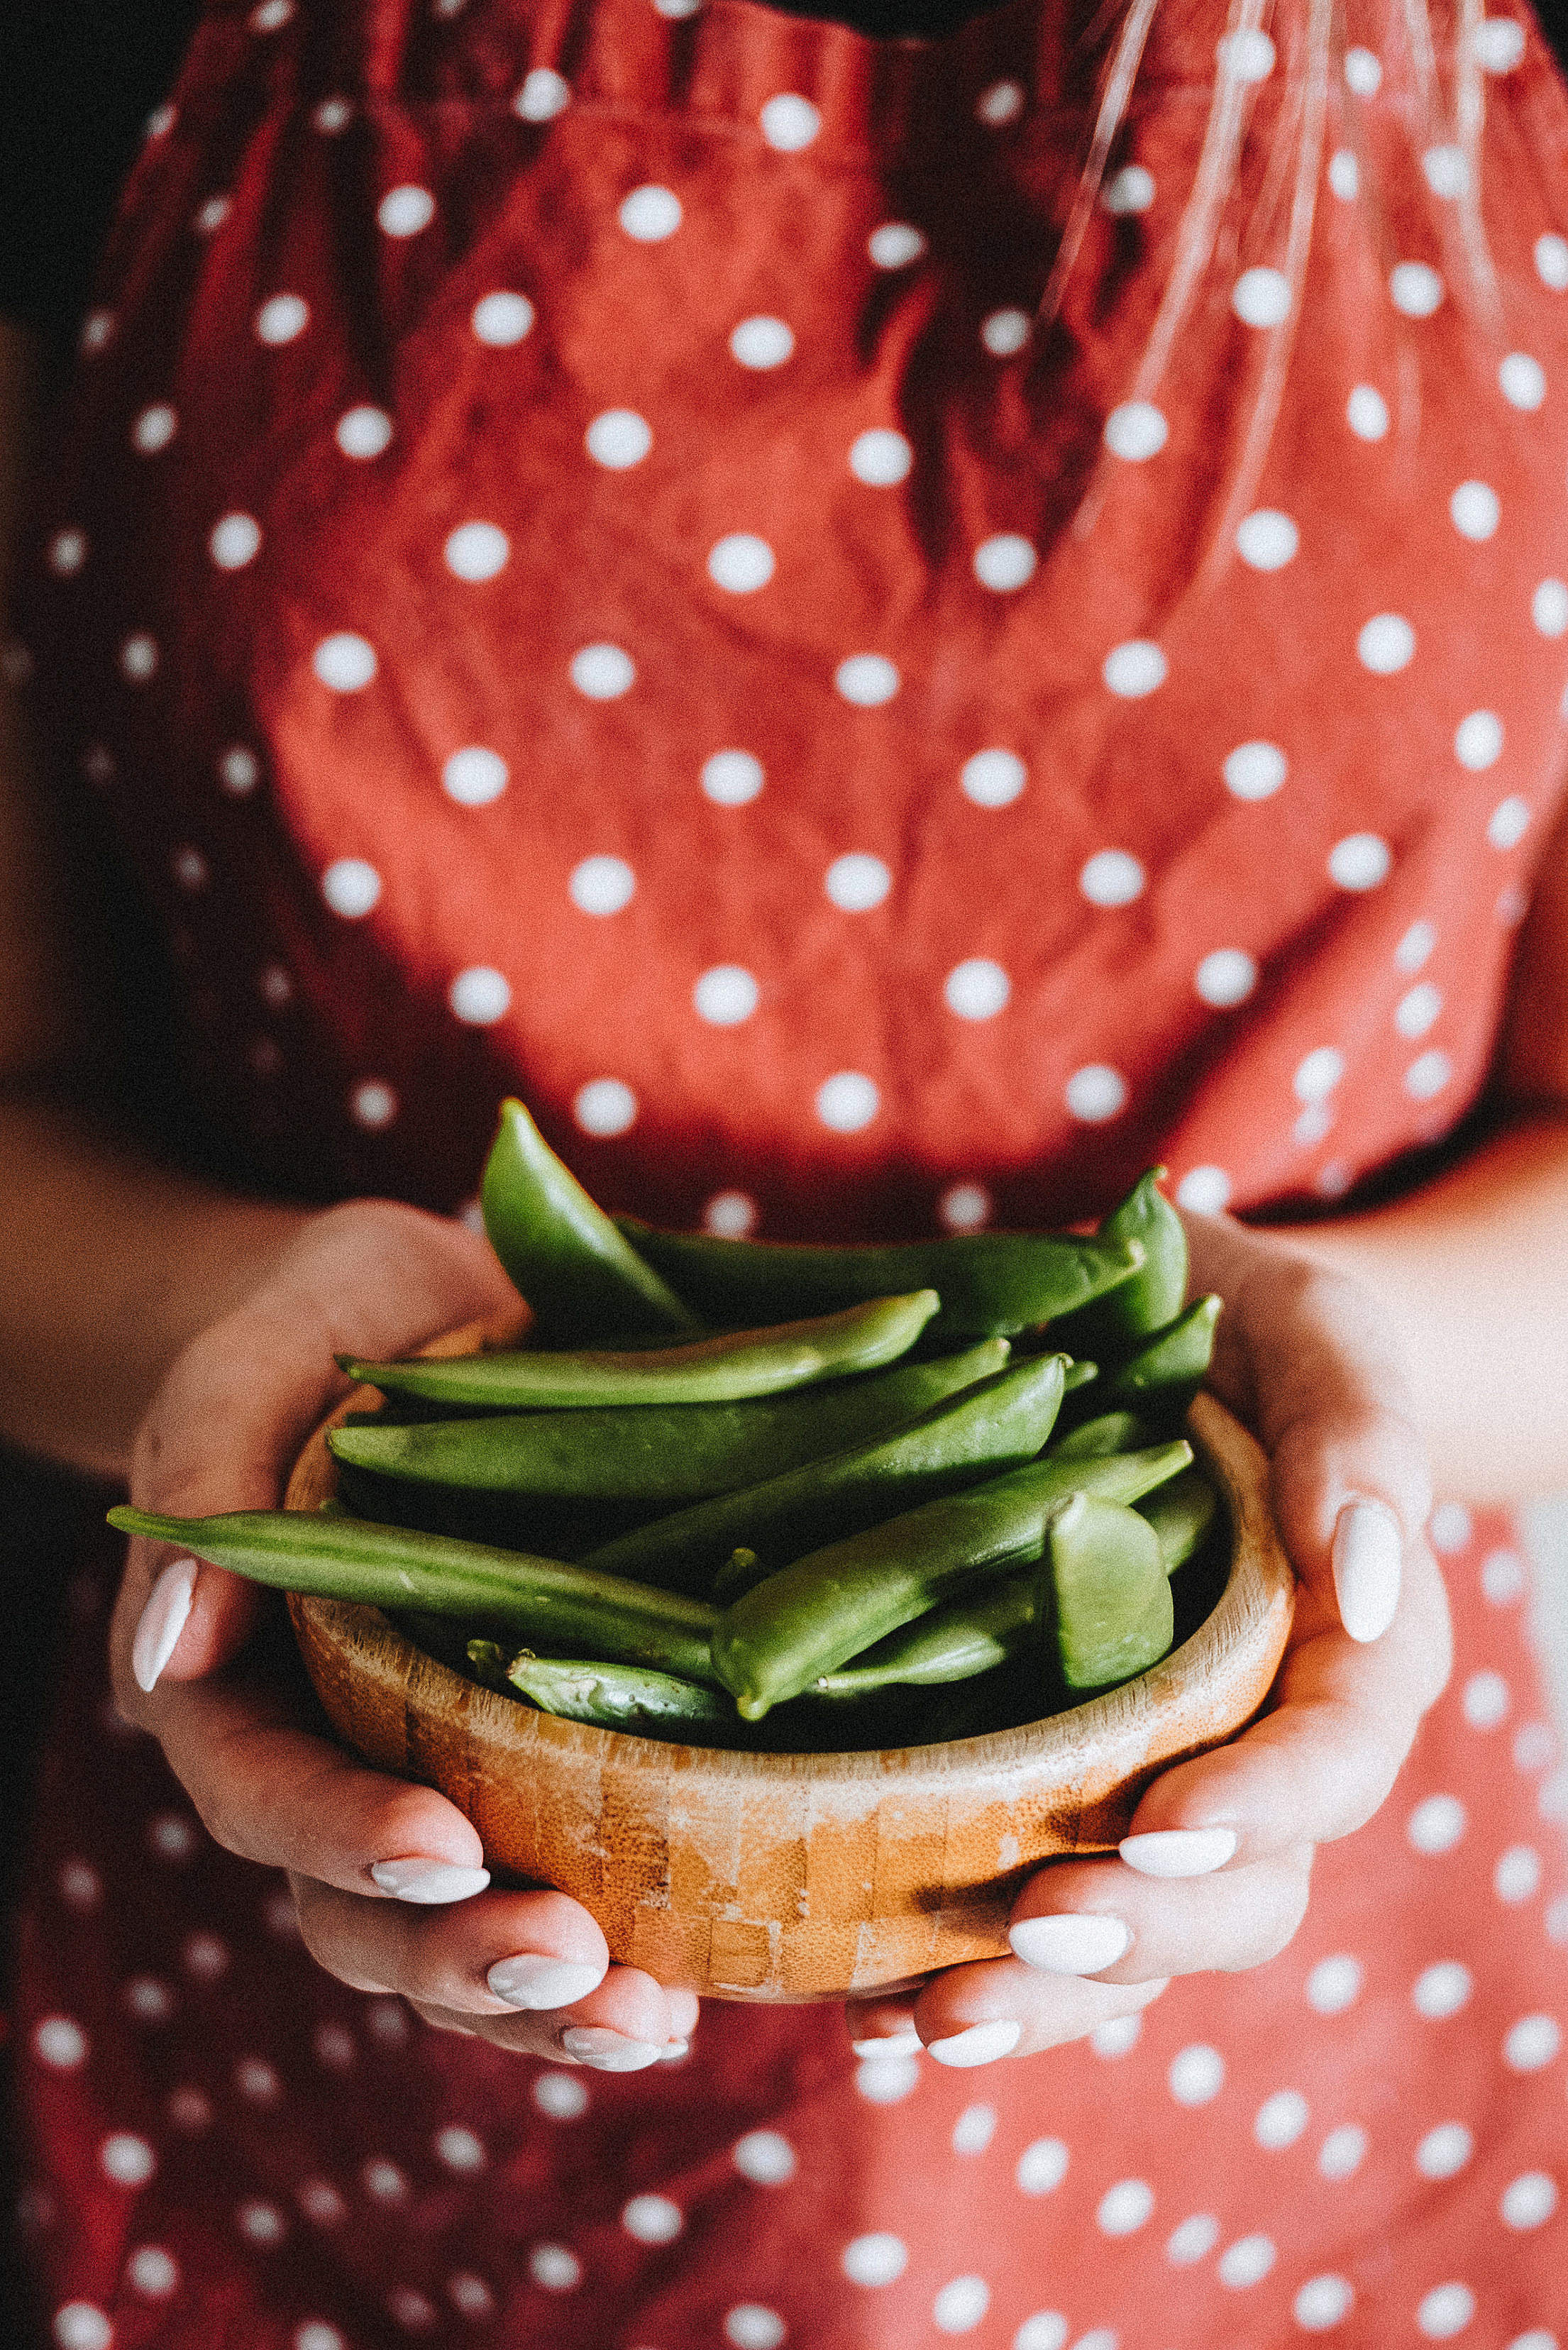 Woman Holding a Bowl of Pea Pods Free Stock Photo